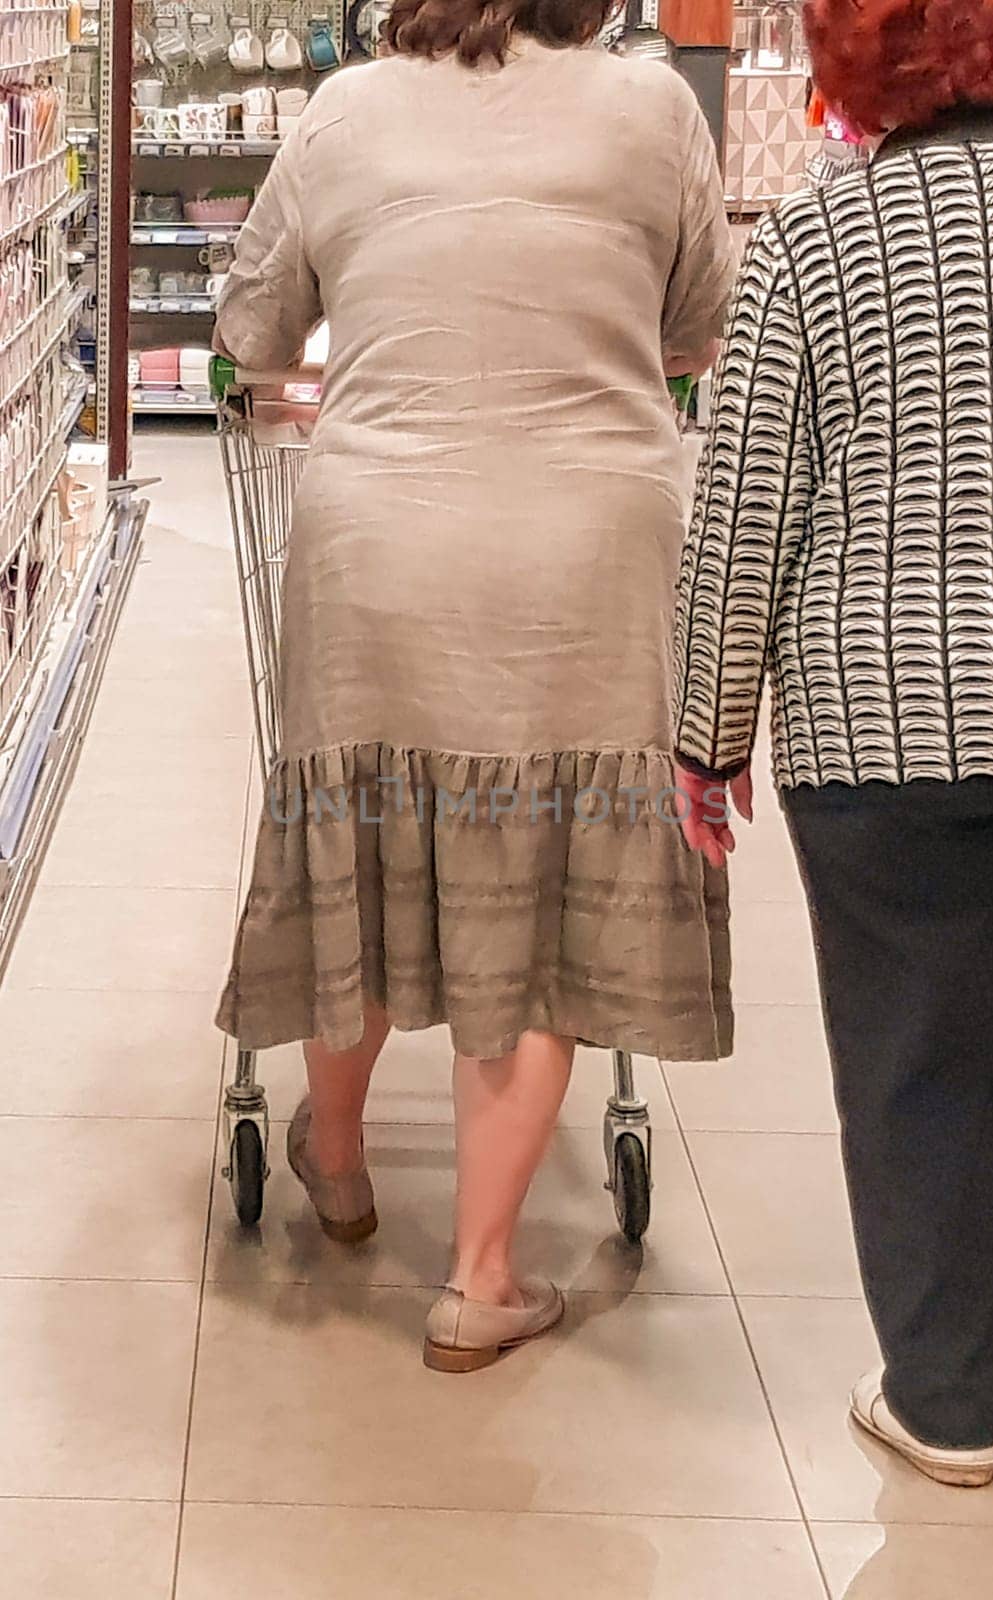 Two elderly women with a shopping cart of Caucasian appearance in a supermarket, back view, vertical, close-up by claire_lucia